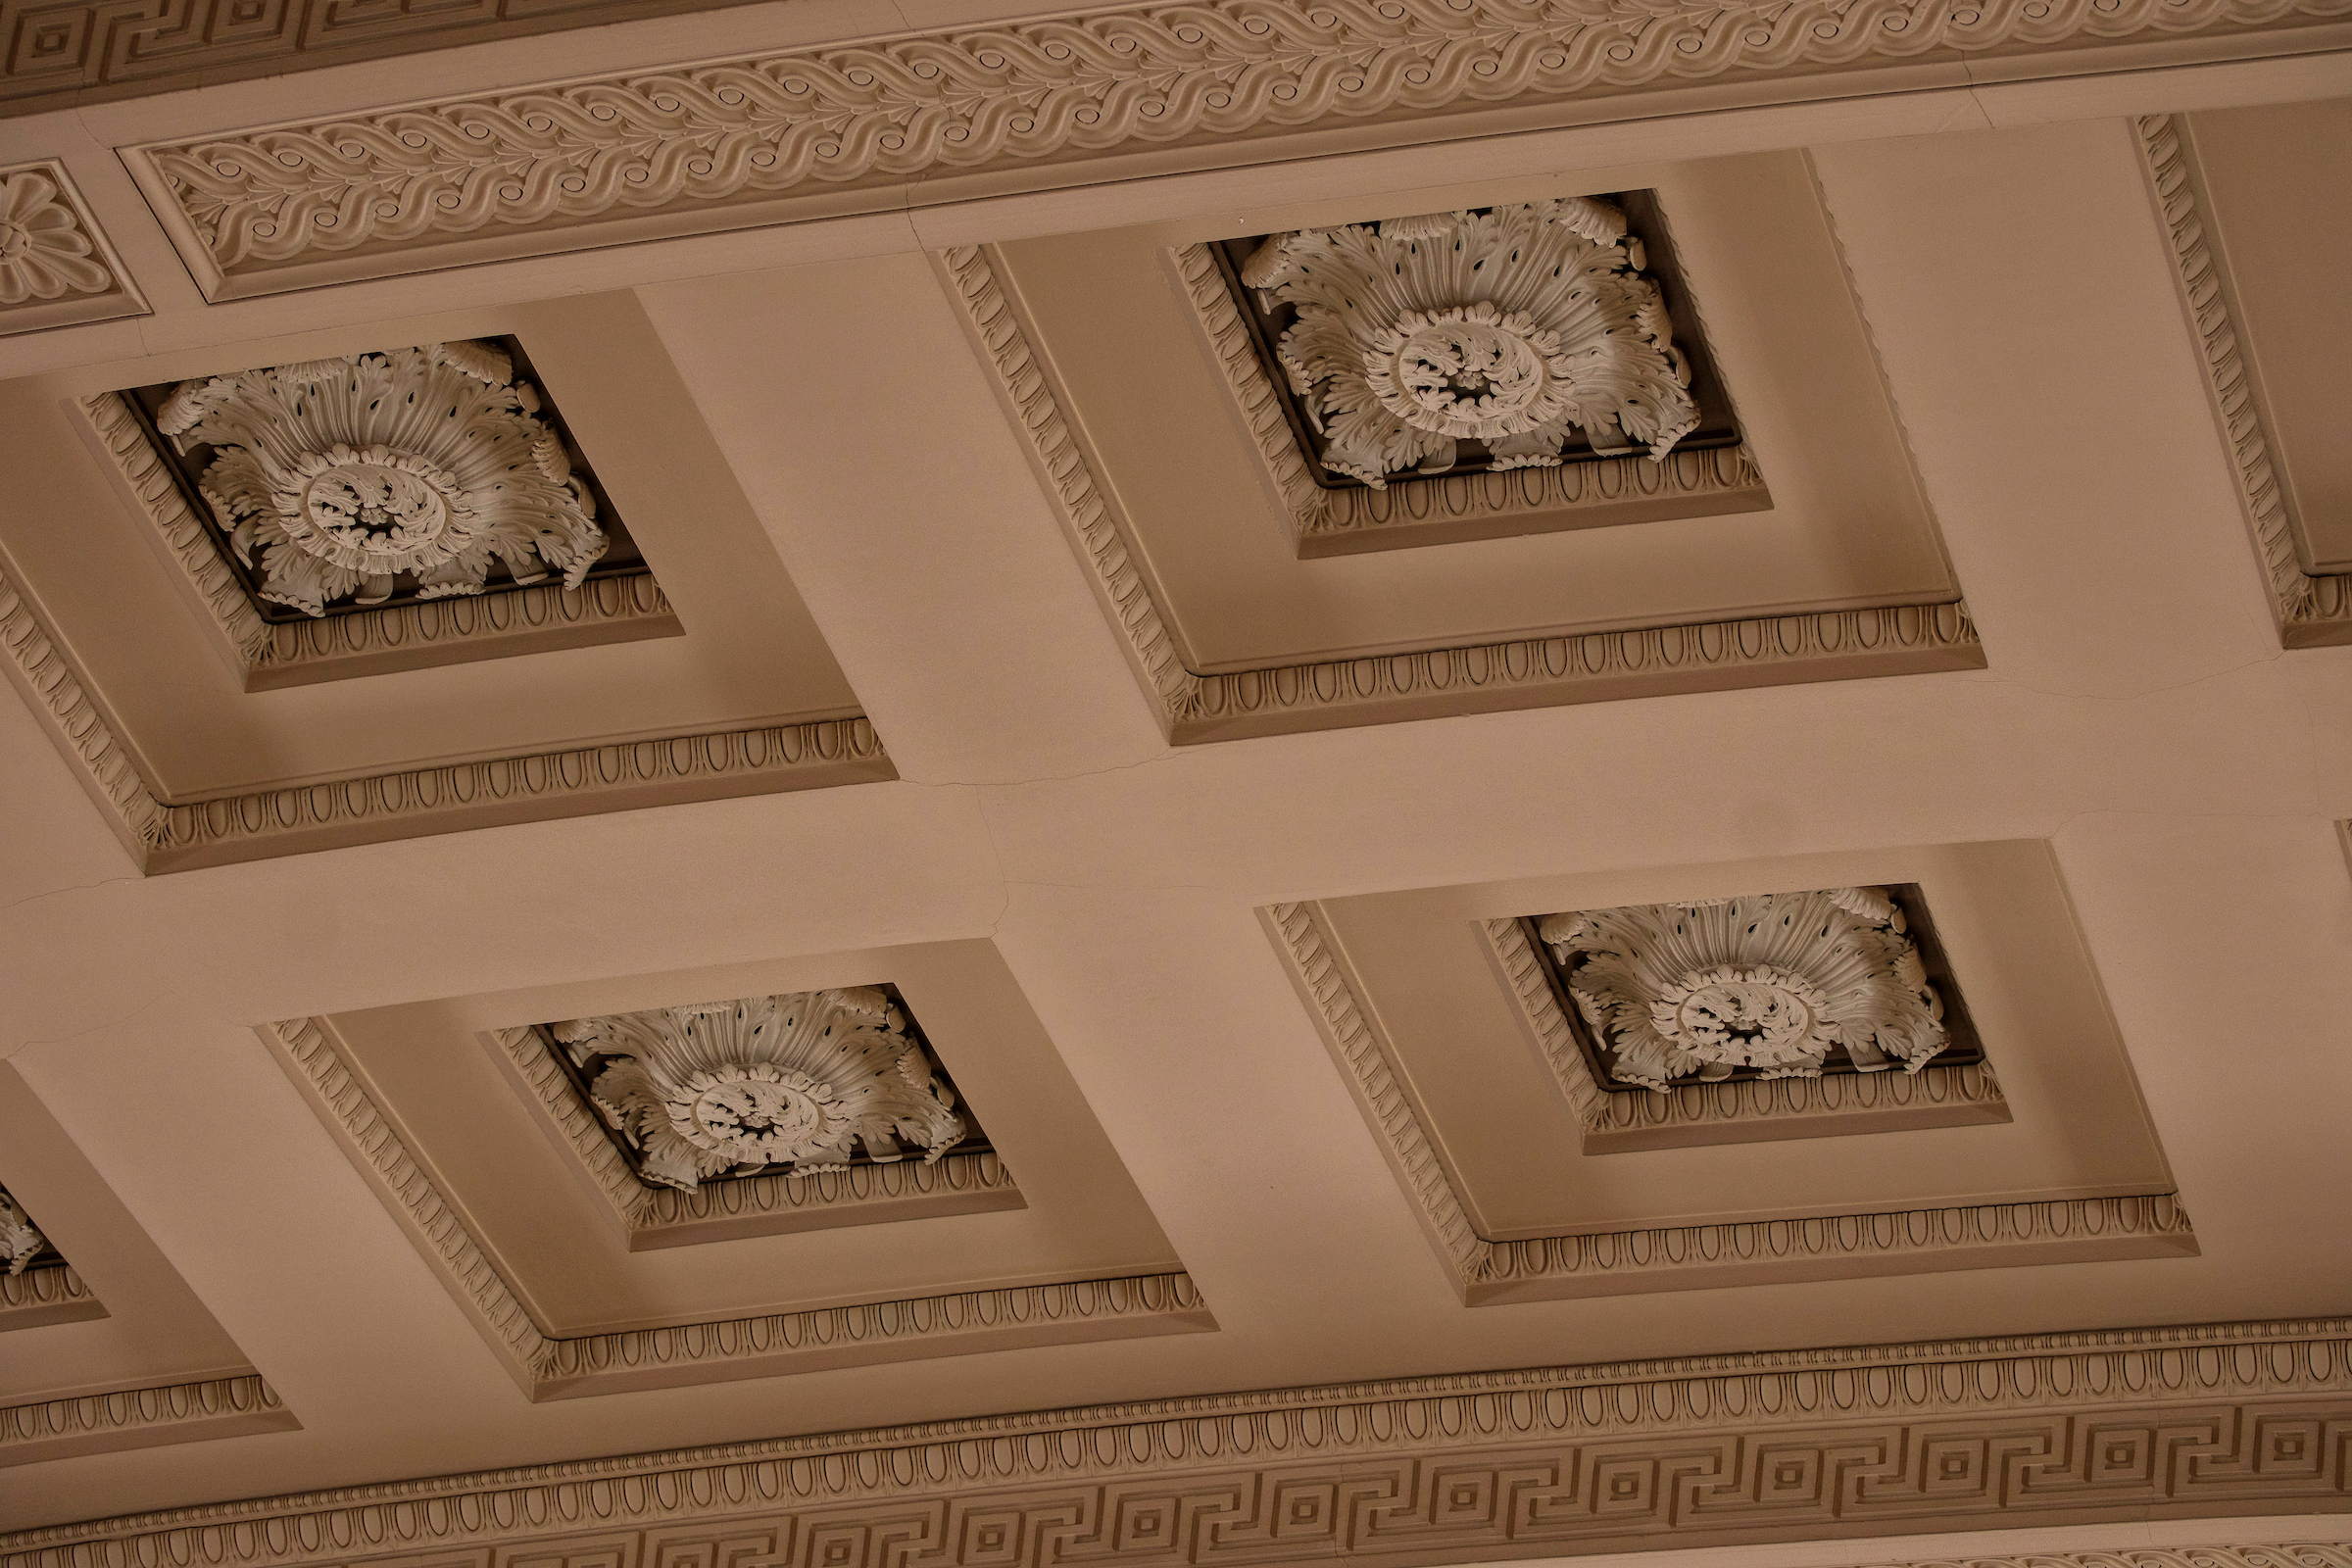 Ceiling image of the inside of the building